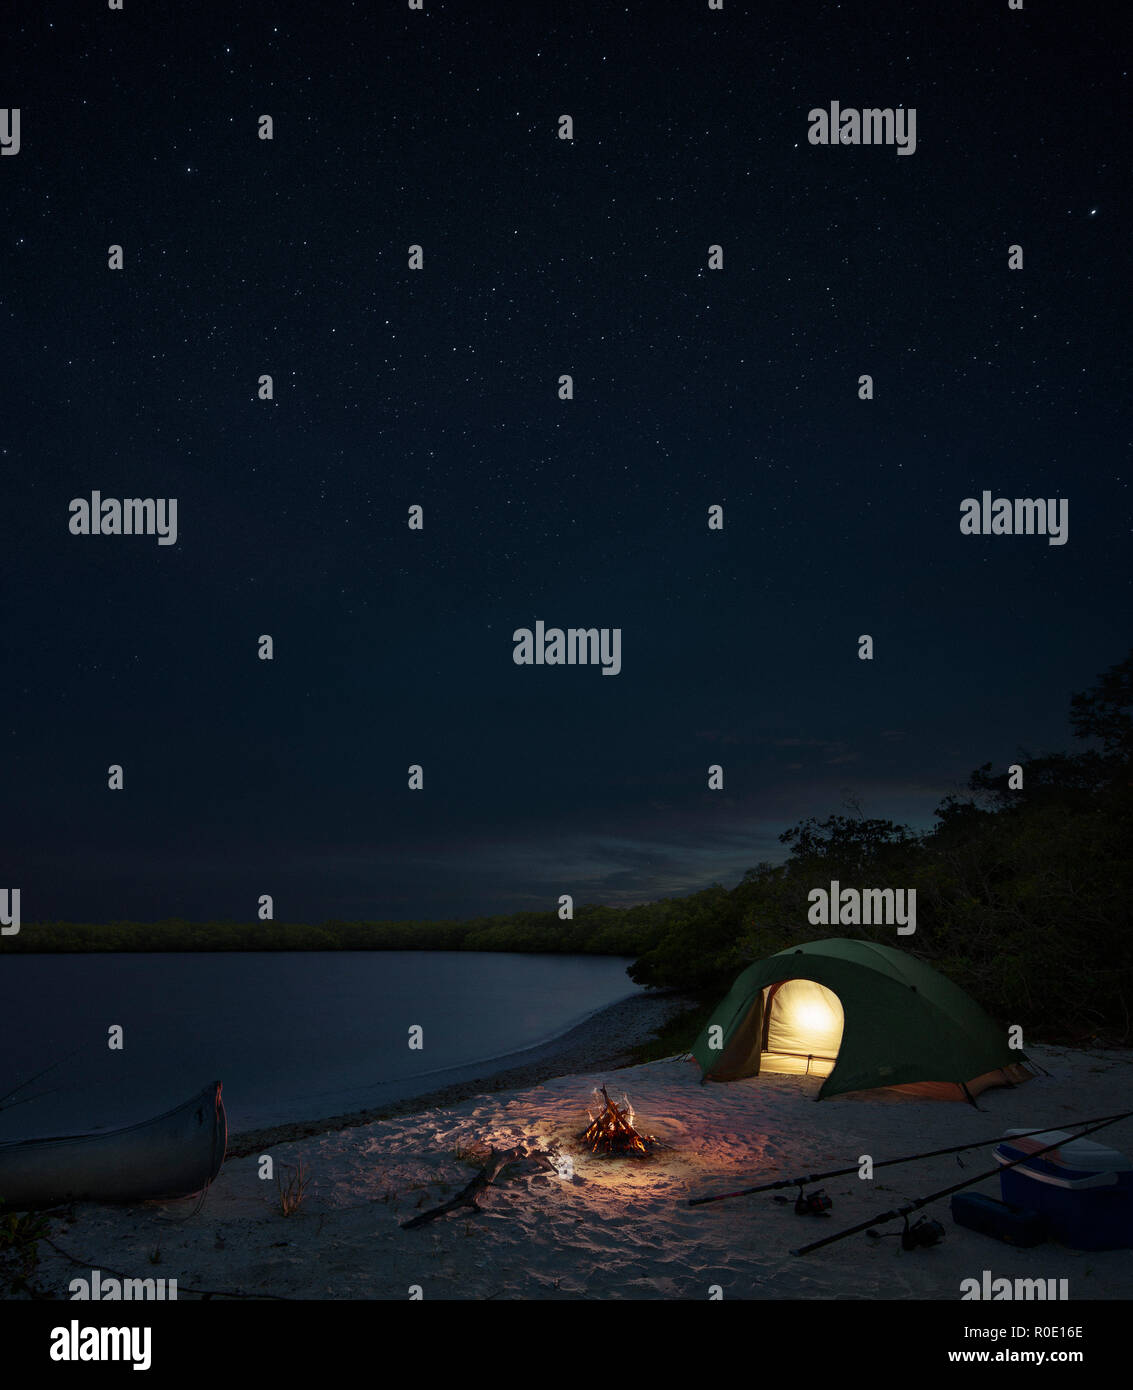 Tent and Campfire on Tropical Island at Night Stock Photo